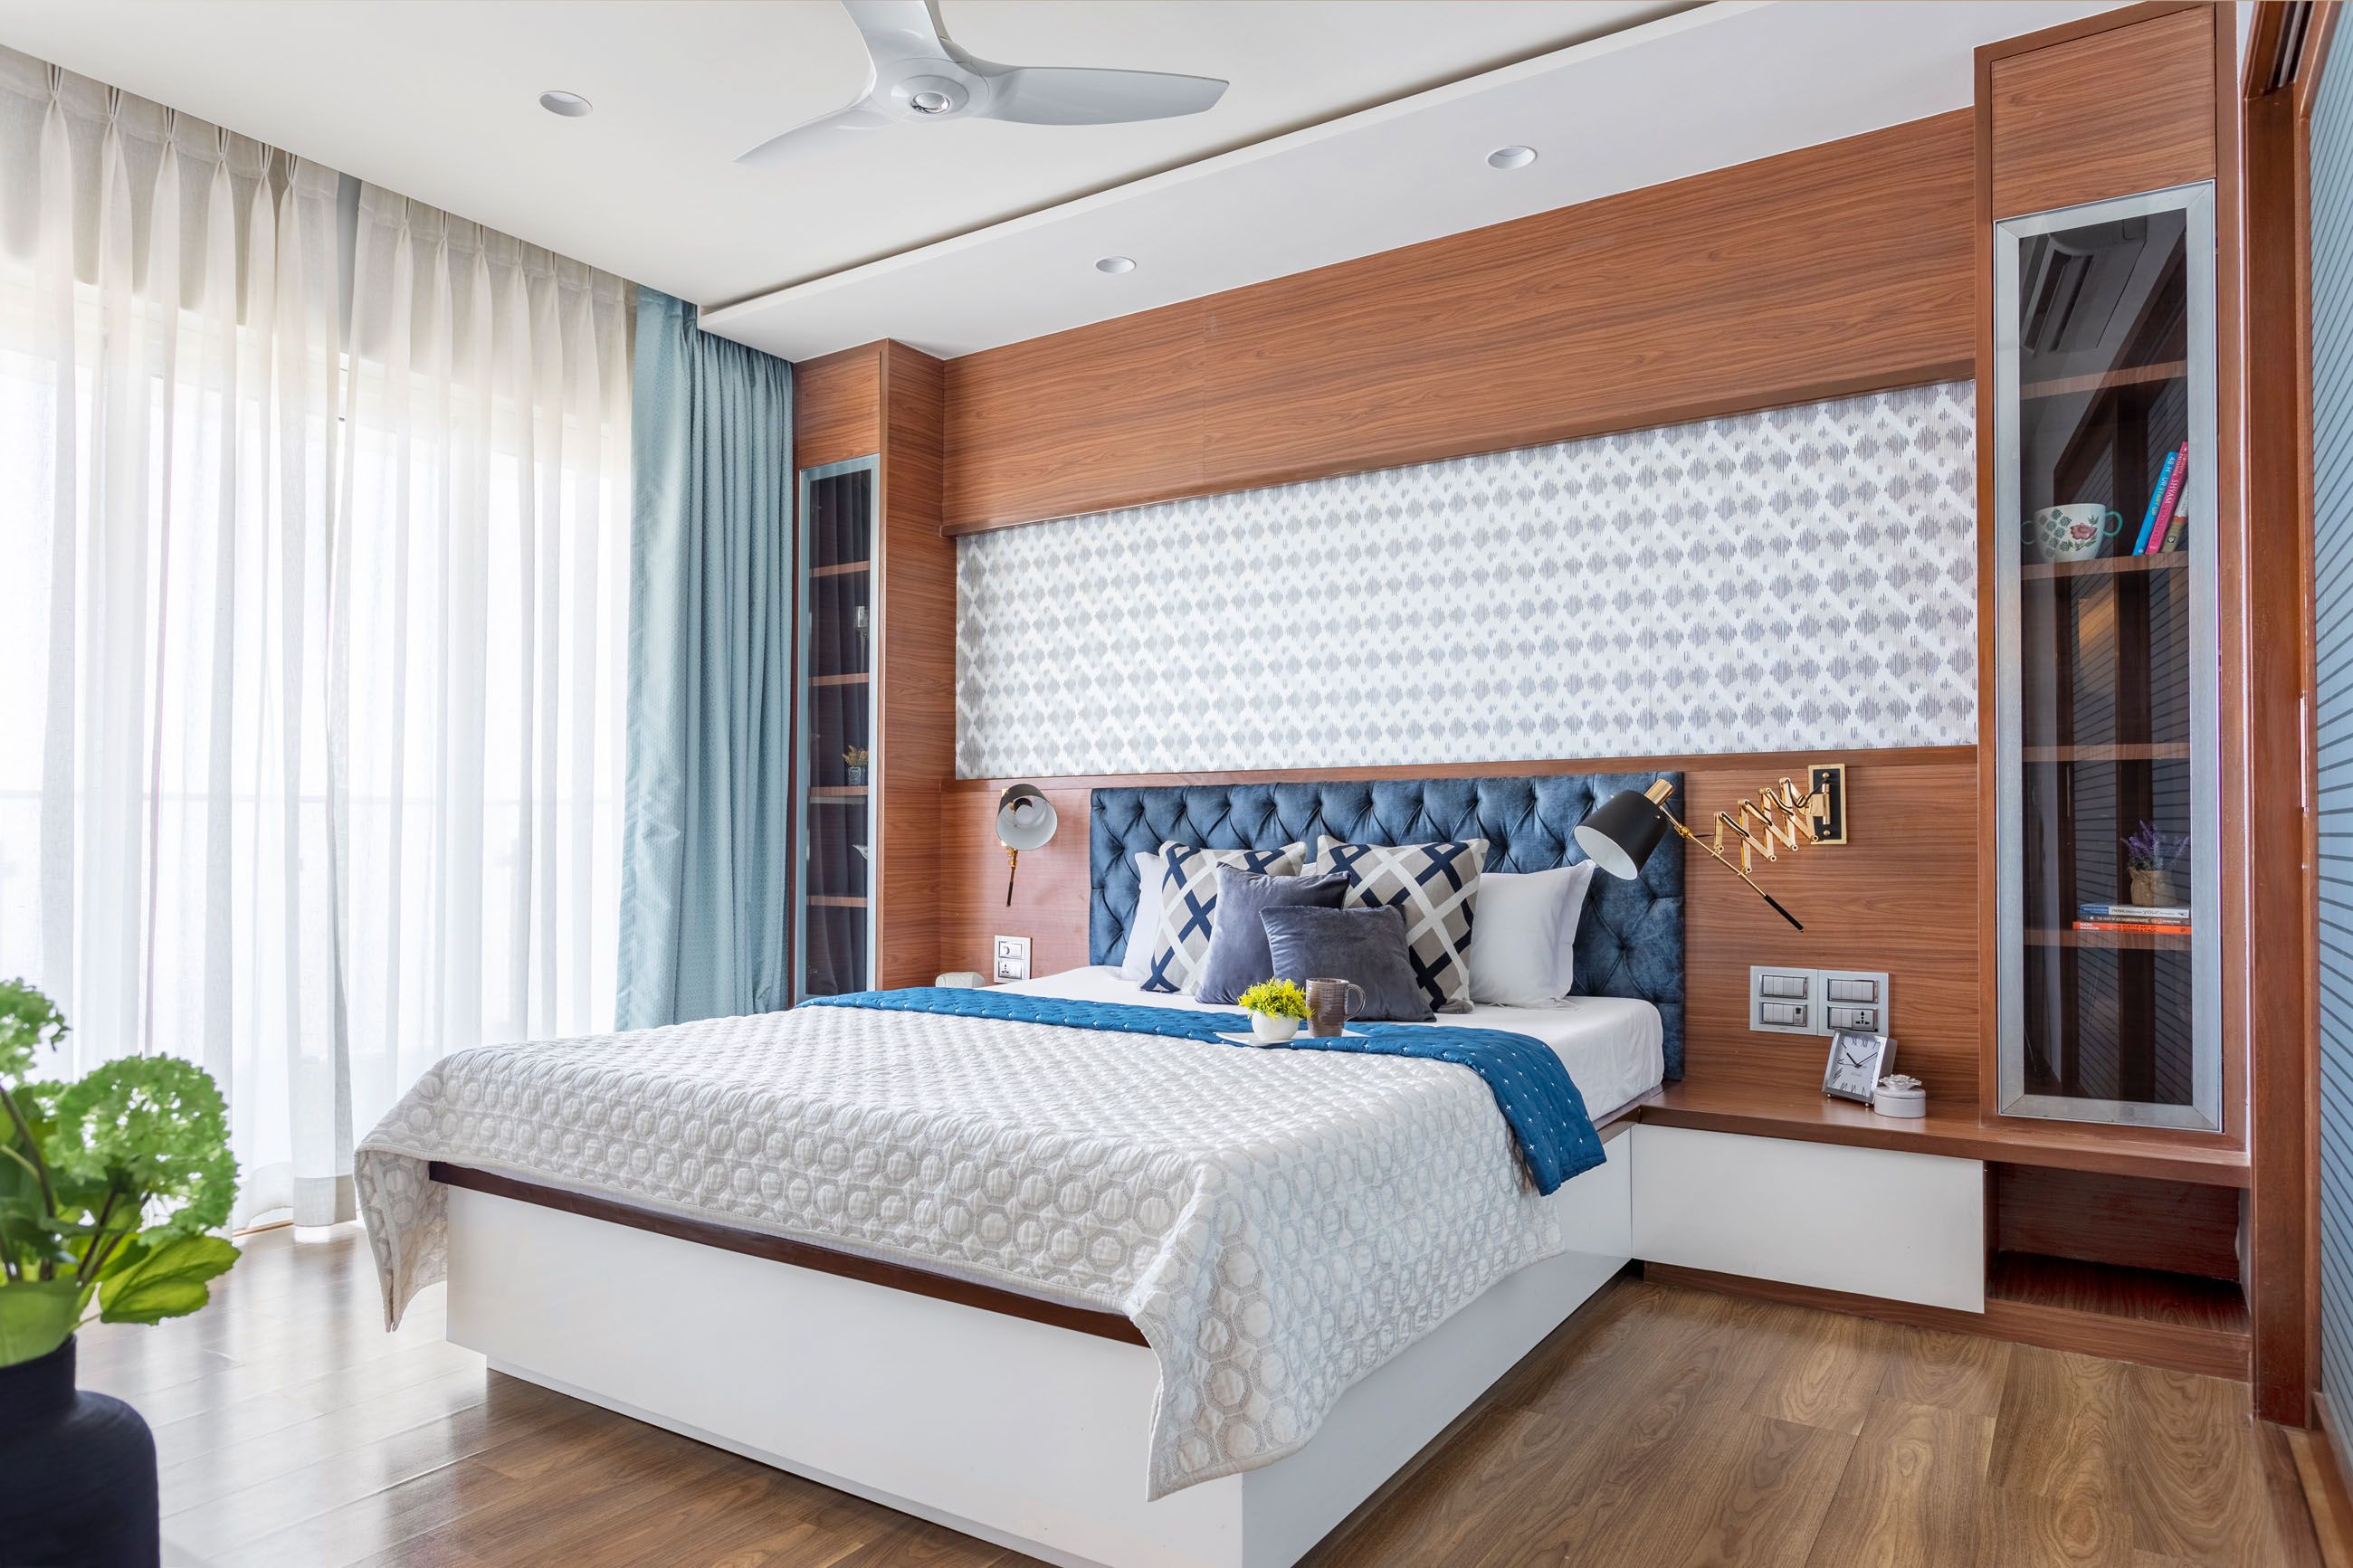 Contemporary Bedroom Design With Wooden Interiors And Bed With Blue Headboard